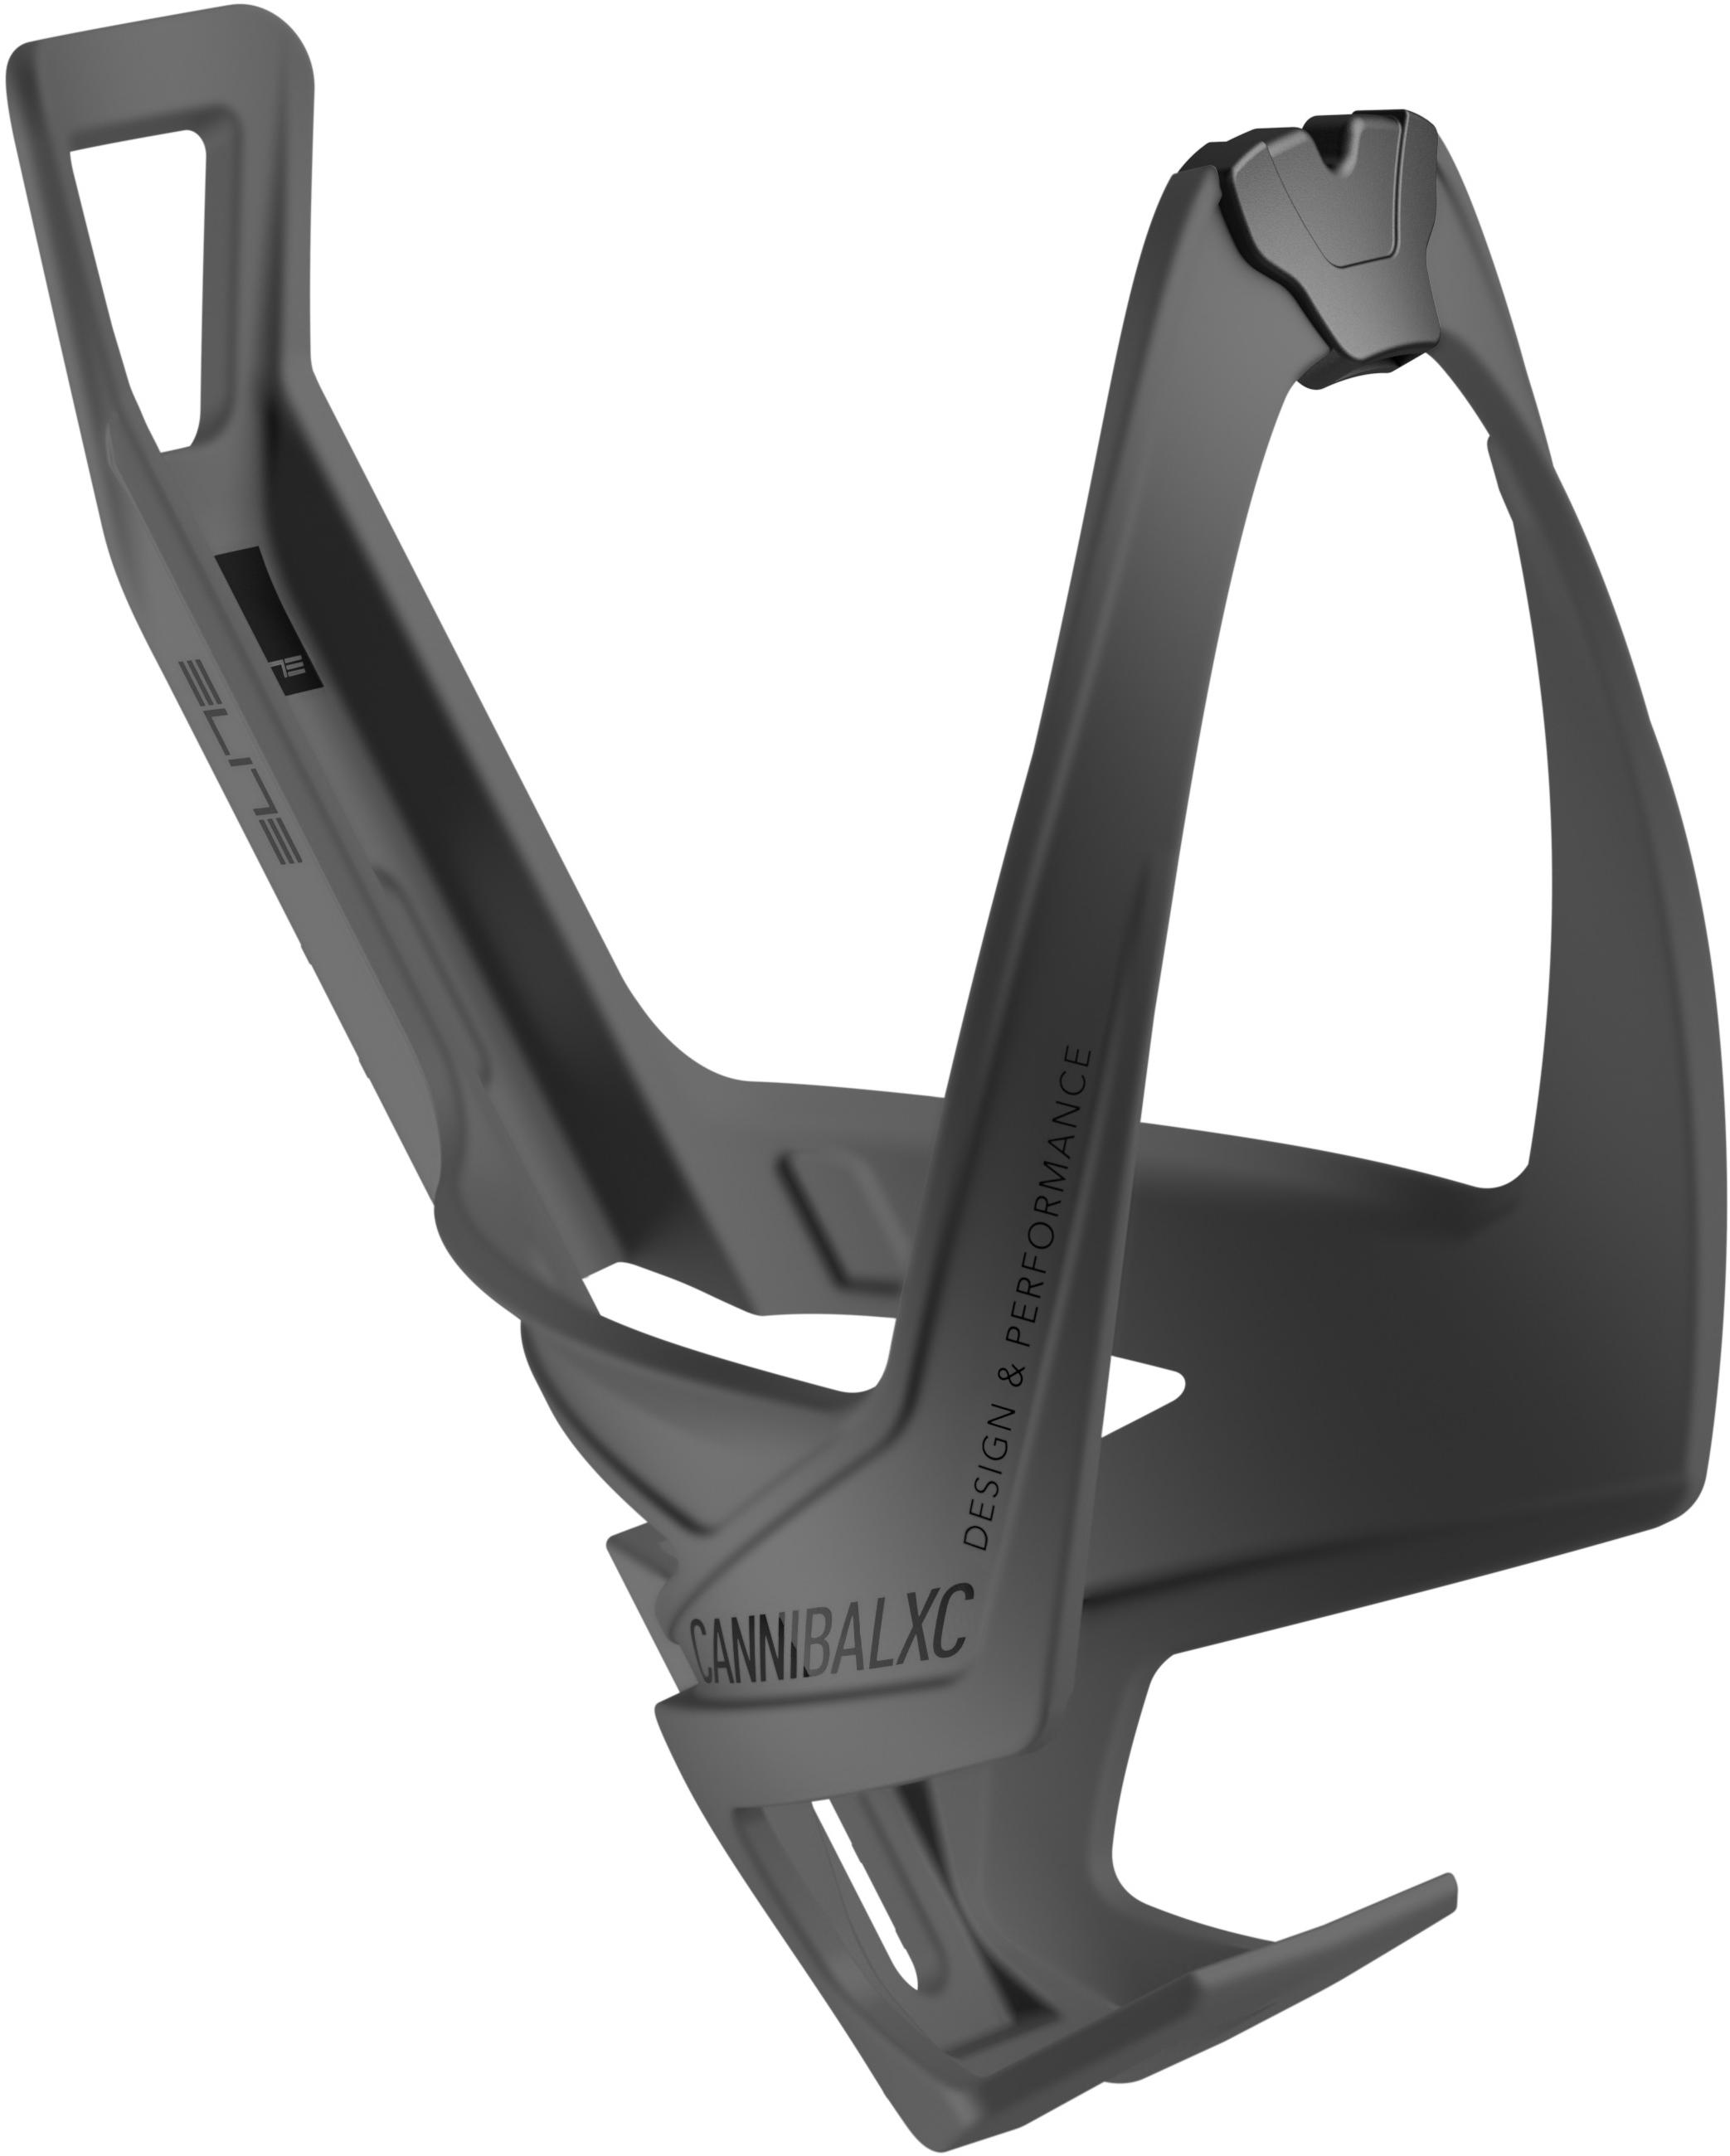 Cannibal Xc Bottle Cage Stealth Black